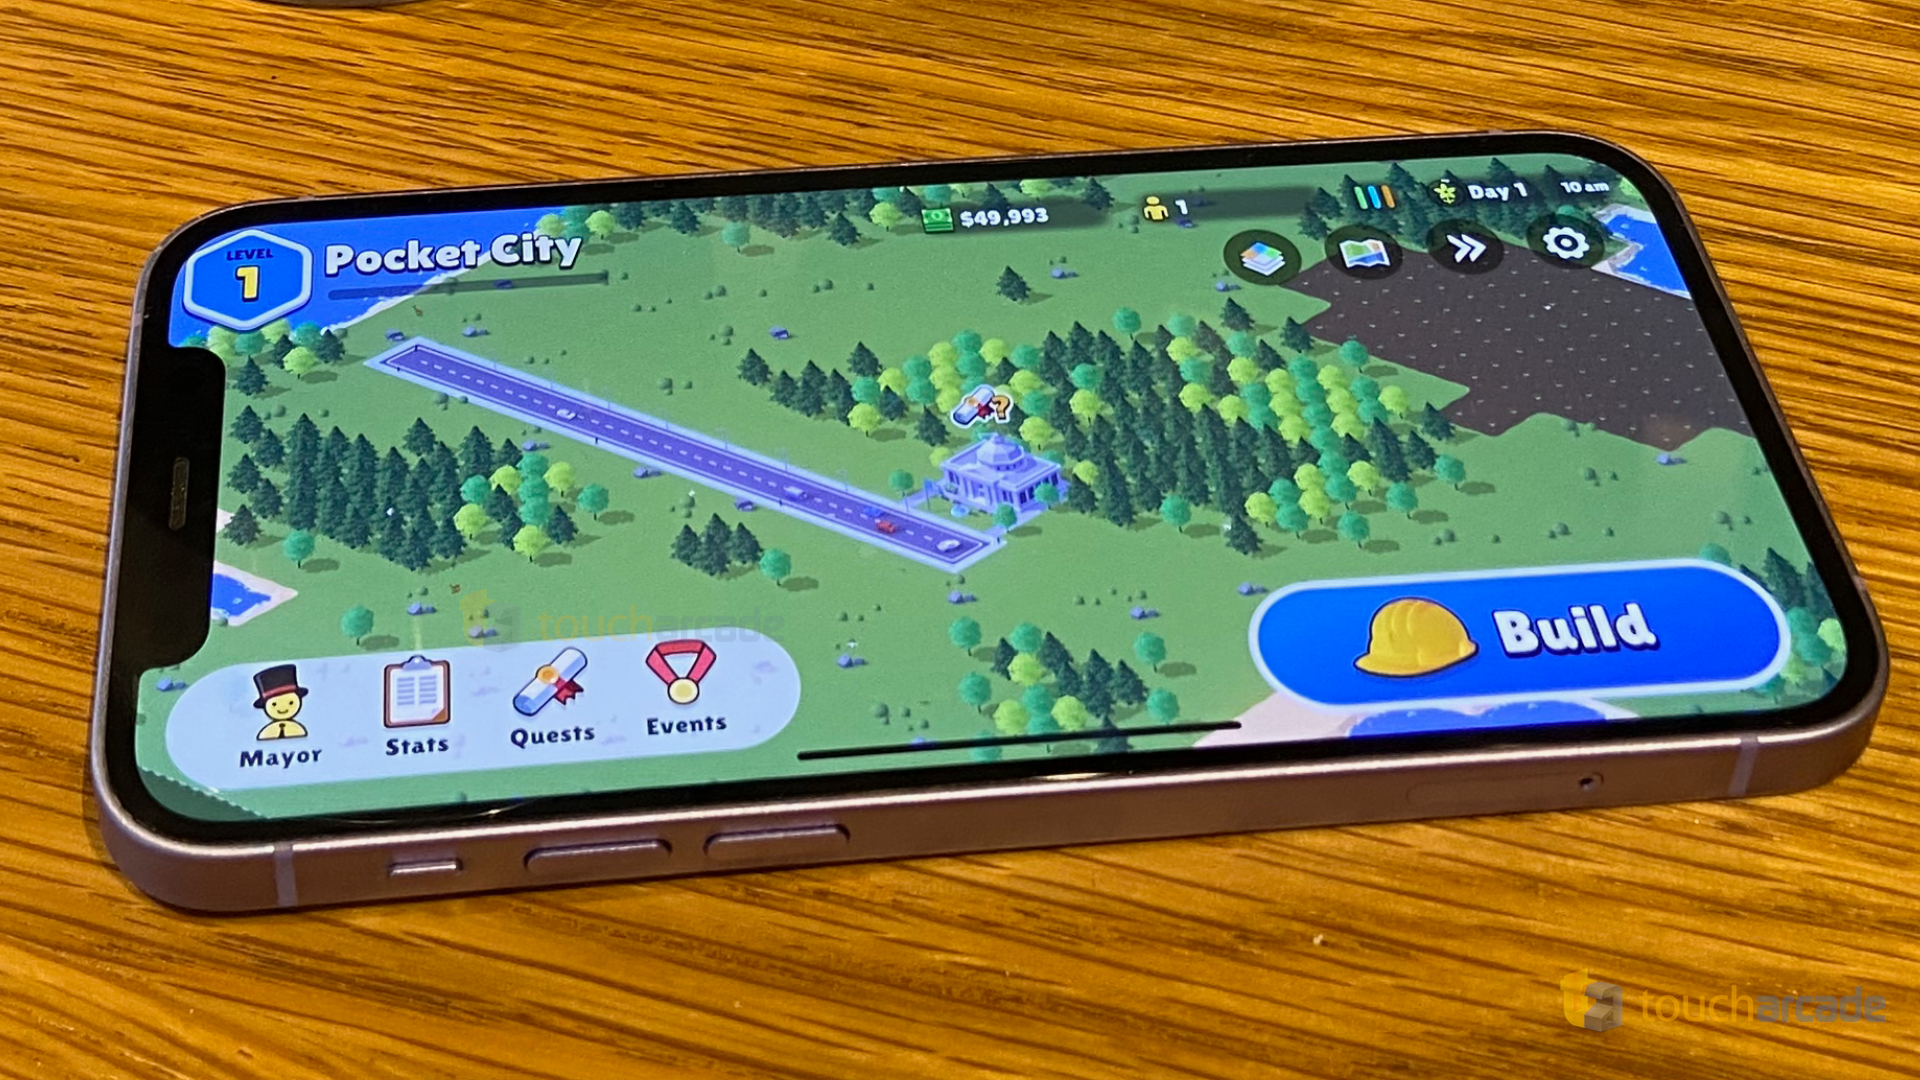 Phone Games: Best Mobile Games for Android & iOS in 2023